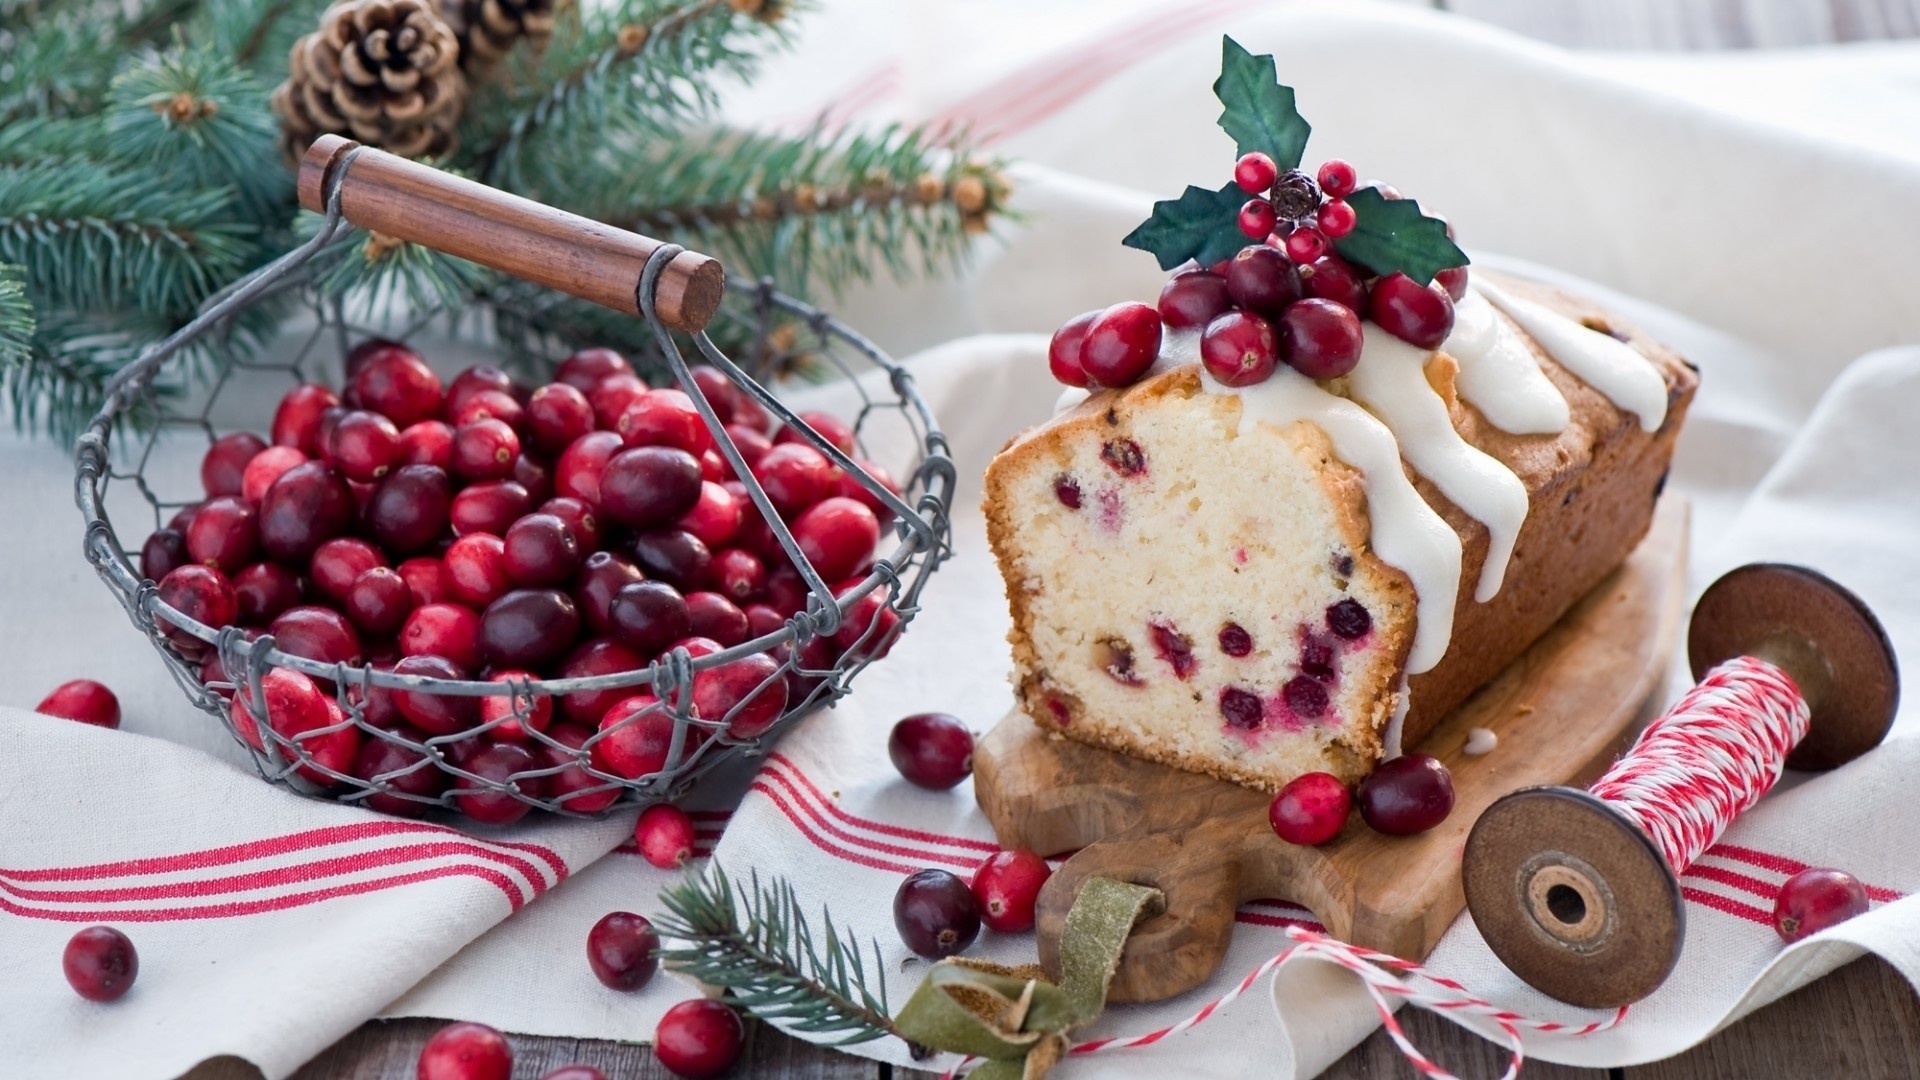 Christmas Dishes Wallpaper